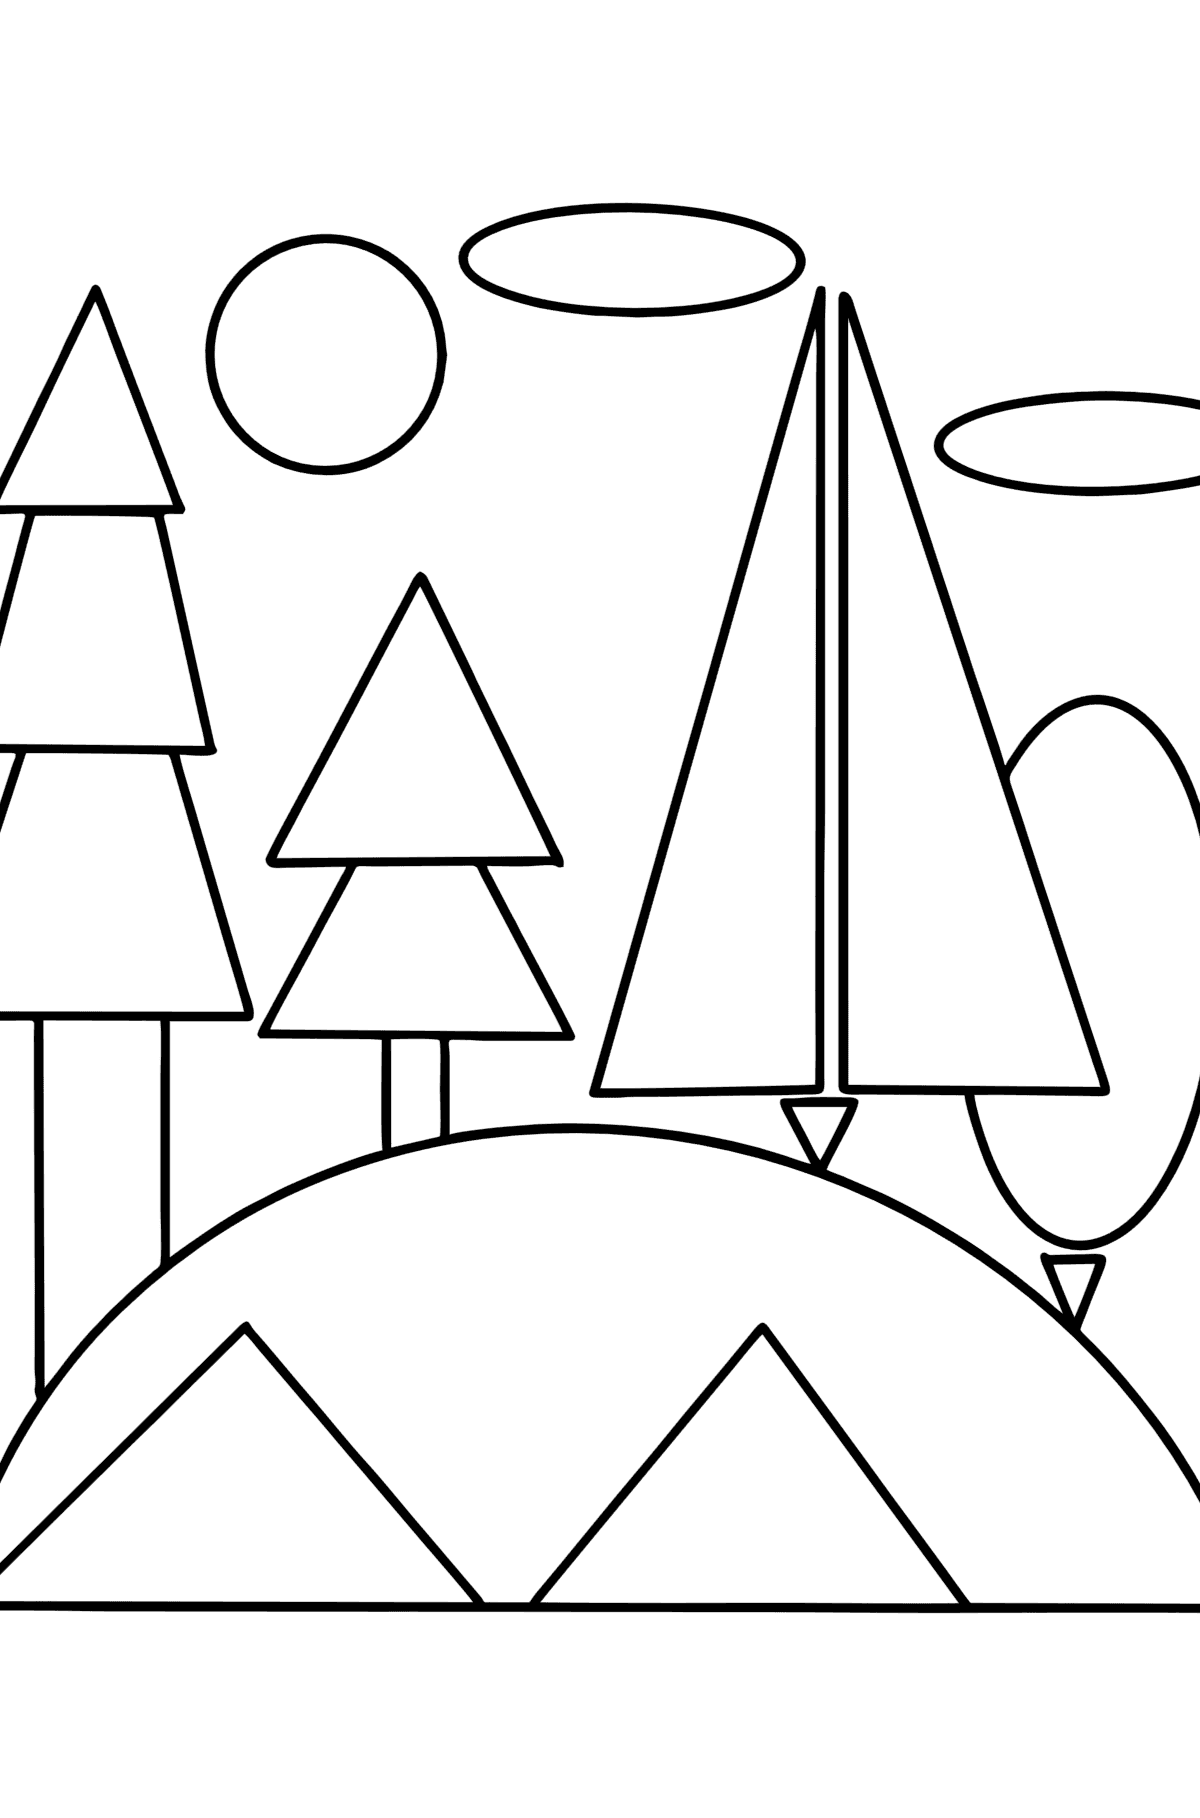 Forest on a Hill of Geometric Shapes coloring page - Coloring Pages for Kids